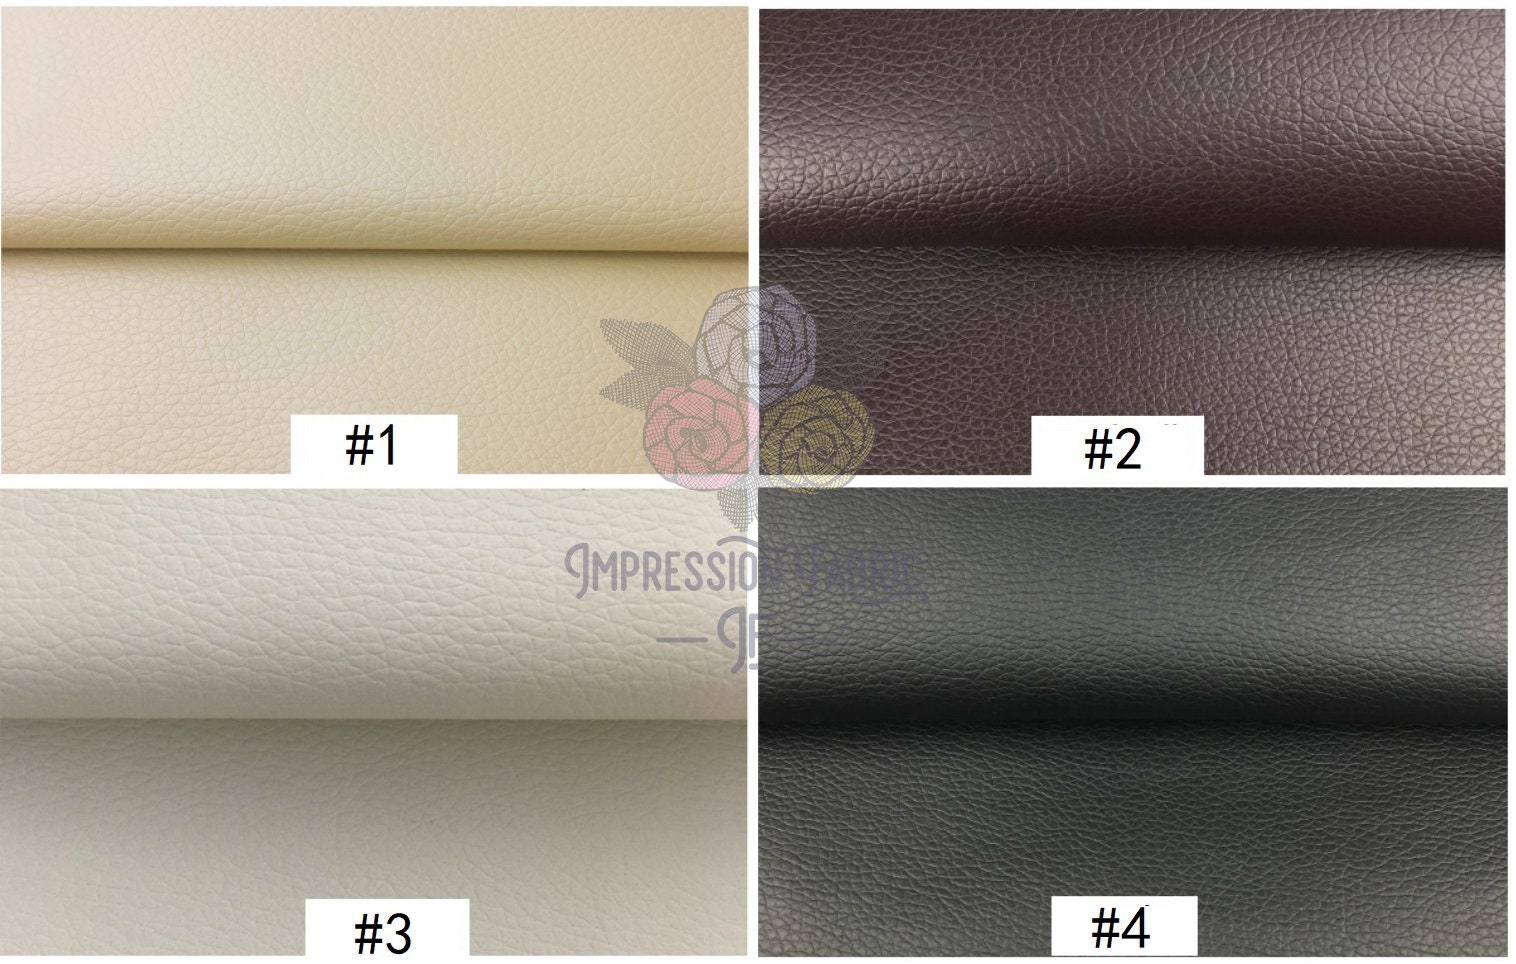 Best Deal for Smooth Self Adhesive Leather PU Fabric Repair